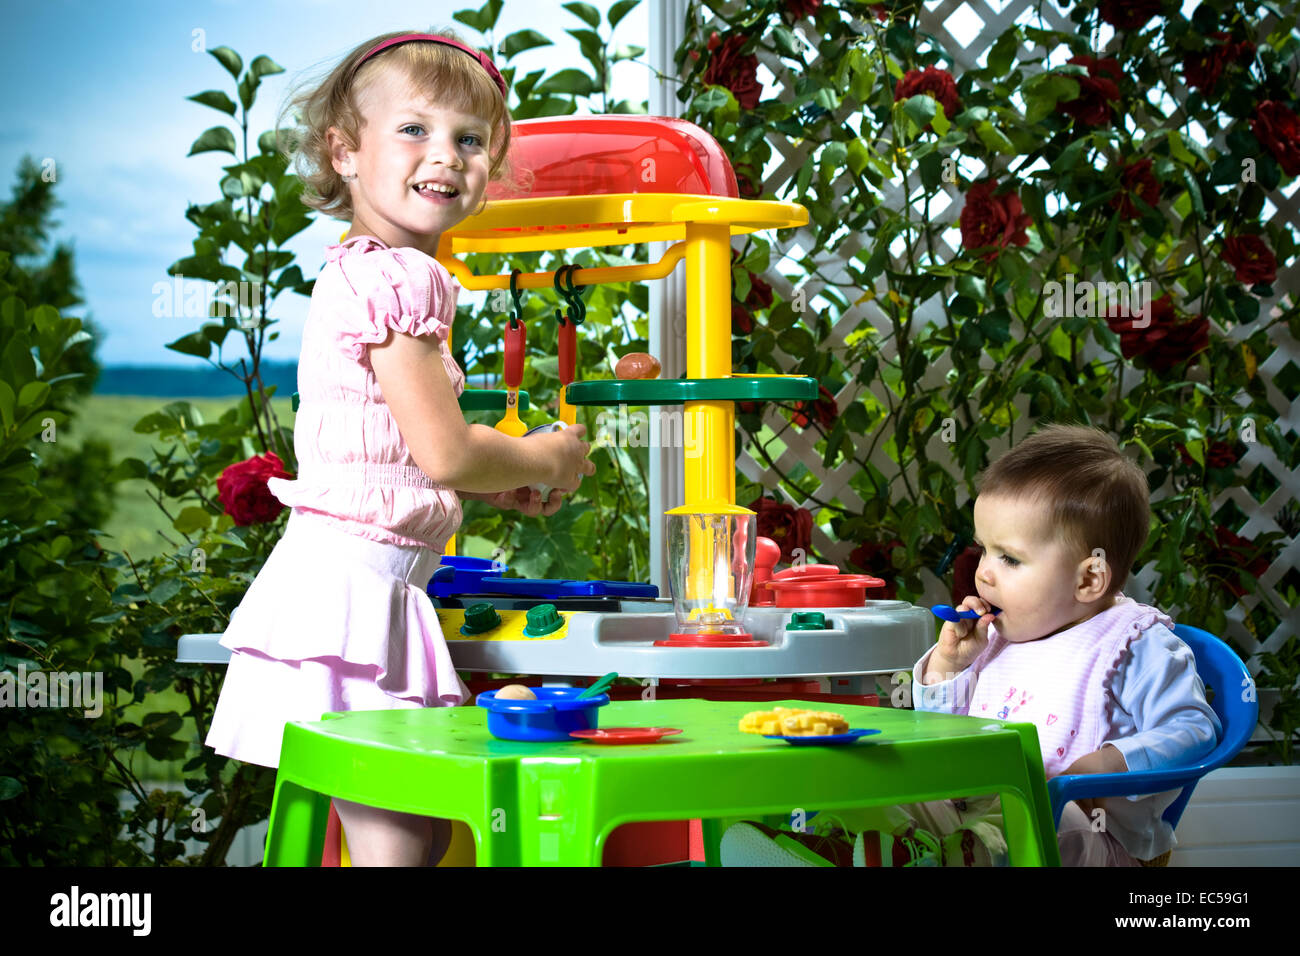 a 6 month old baby and a 4 years old girl in front of toy kitchen Stock Photo